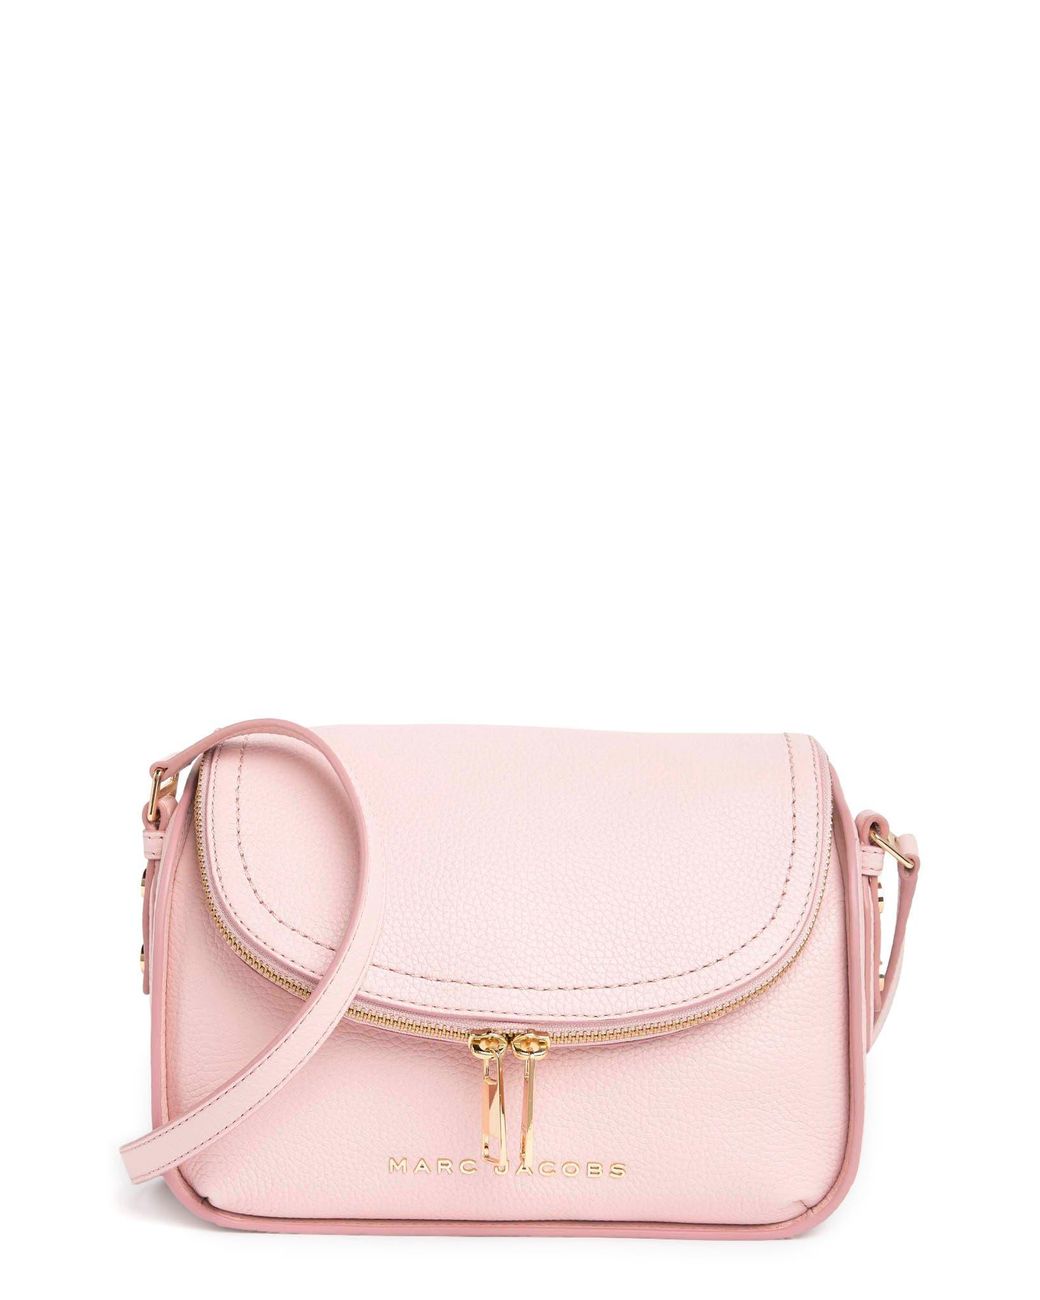 Marc Jacobs The Groove Leather Mini Messenger Bag In Peach Whip At ...